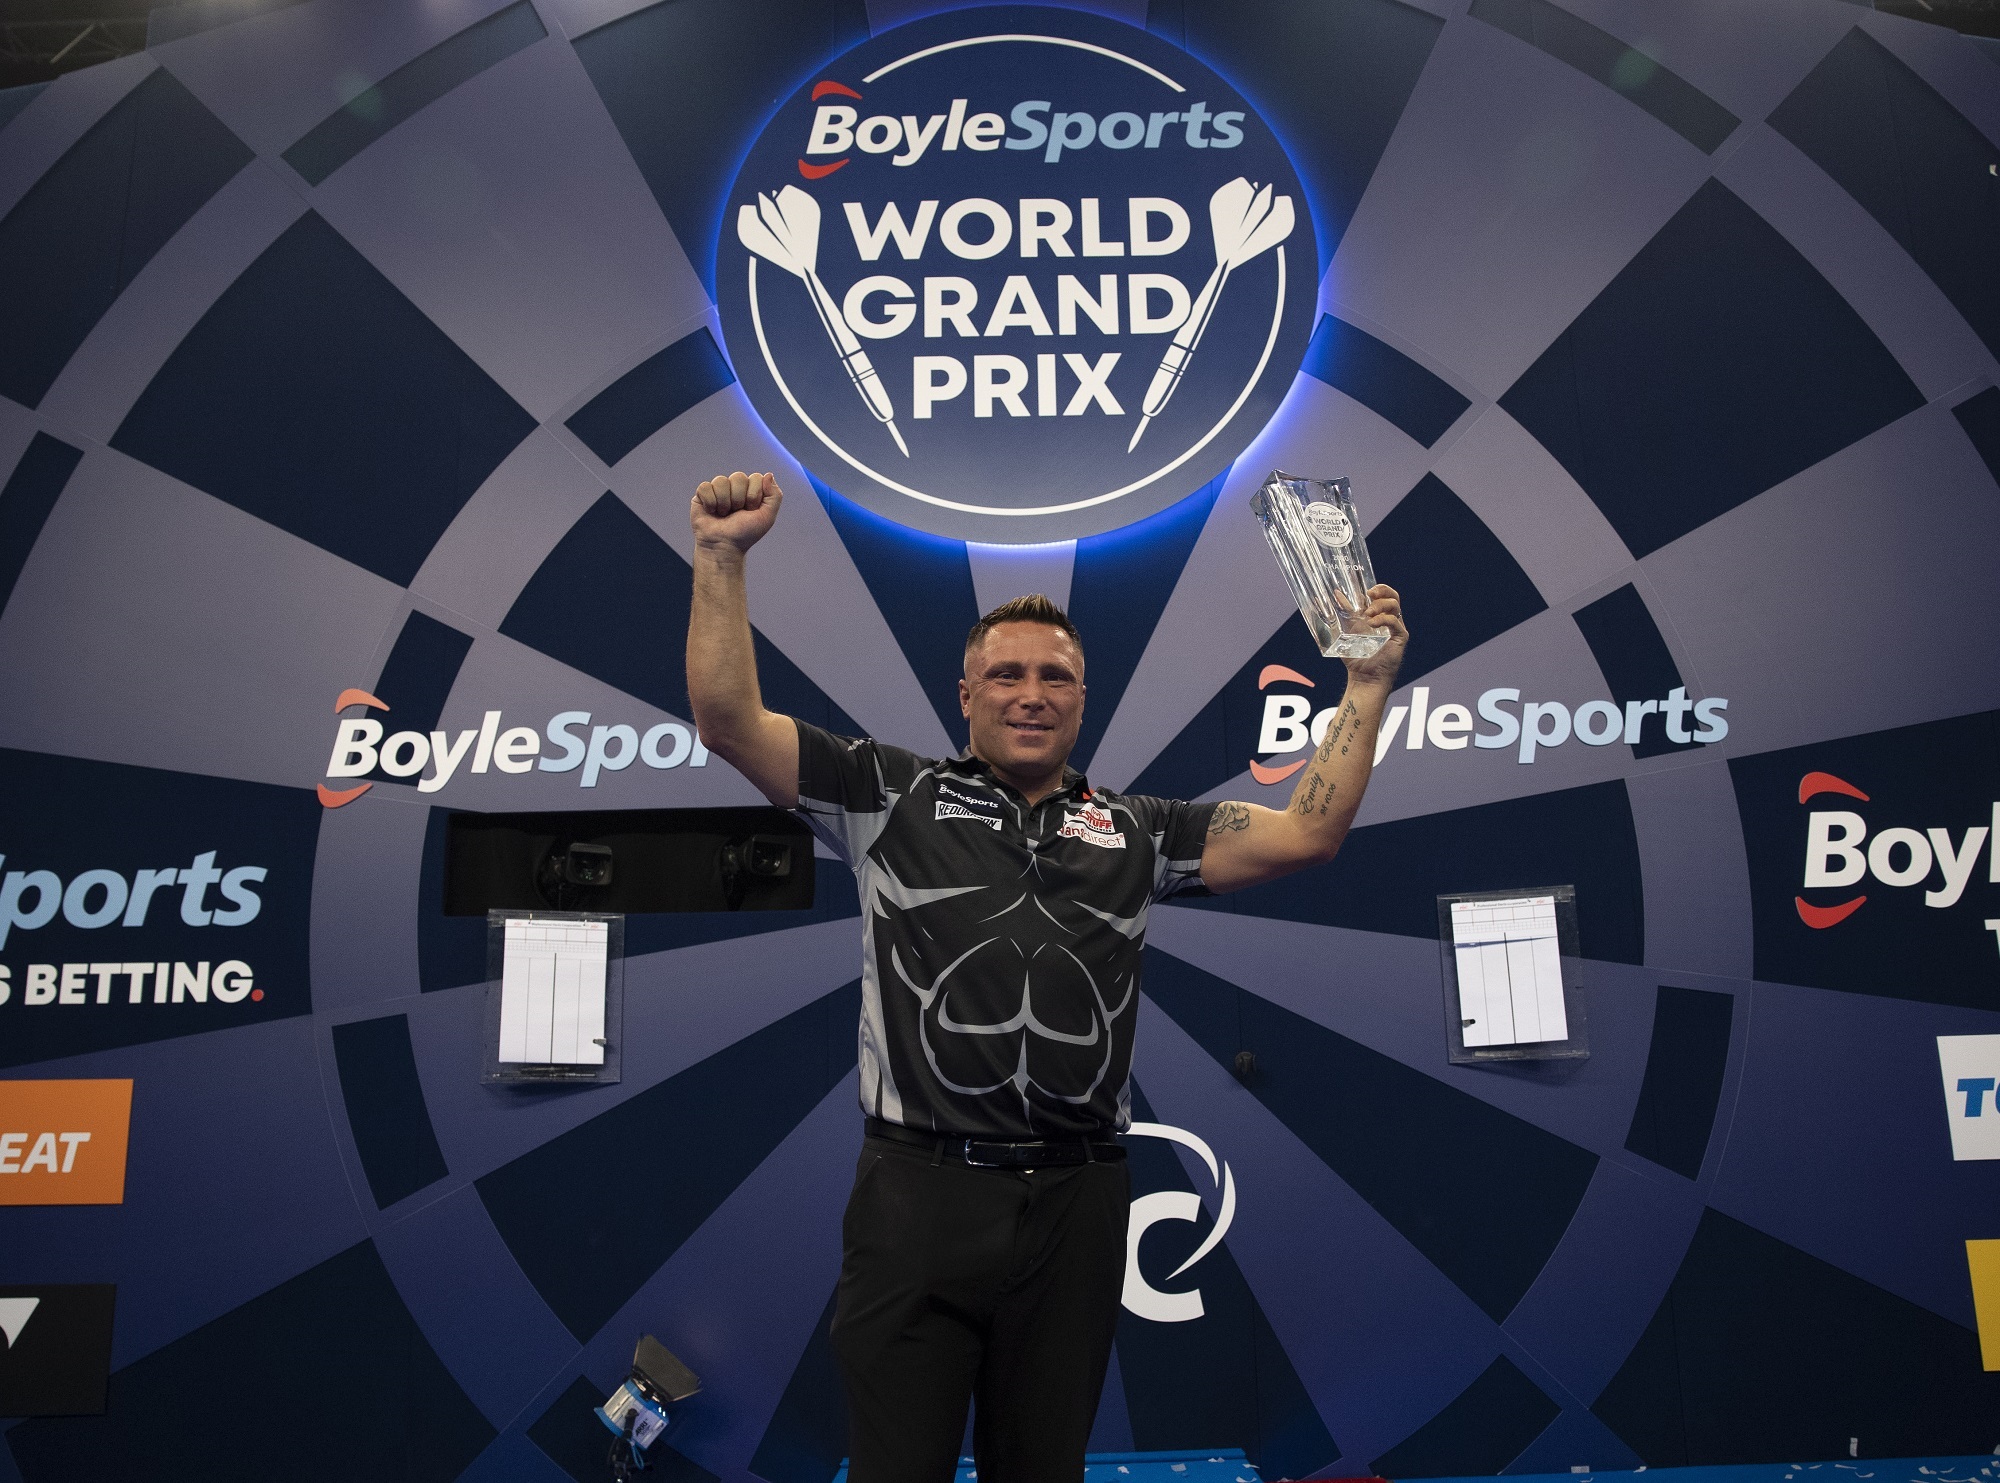 Last chance to secure BoyleSports World Grand Prix priority PDC